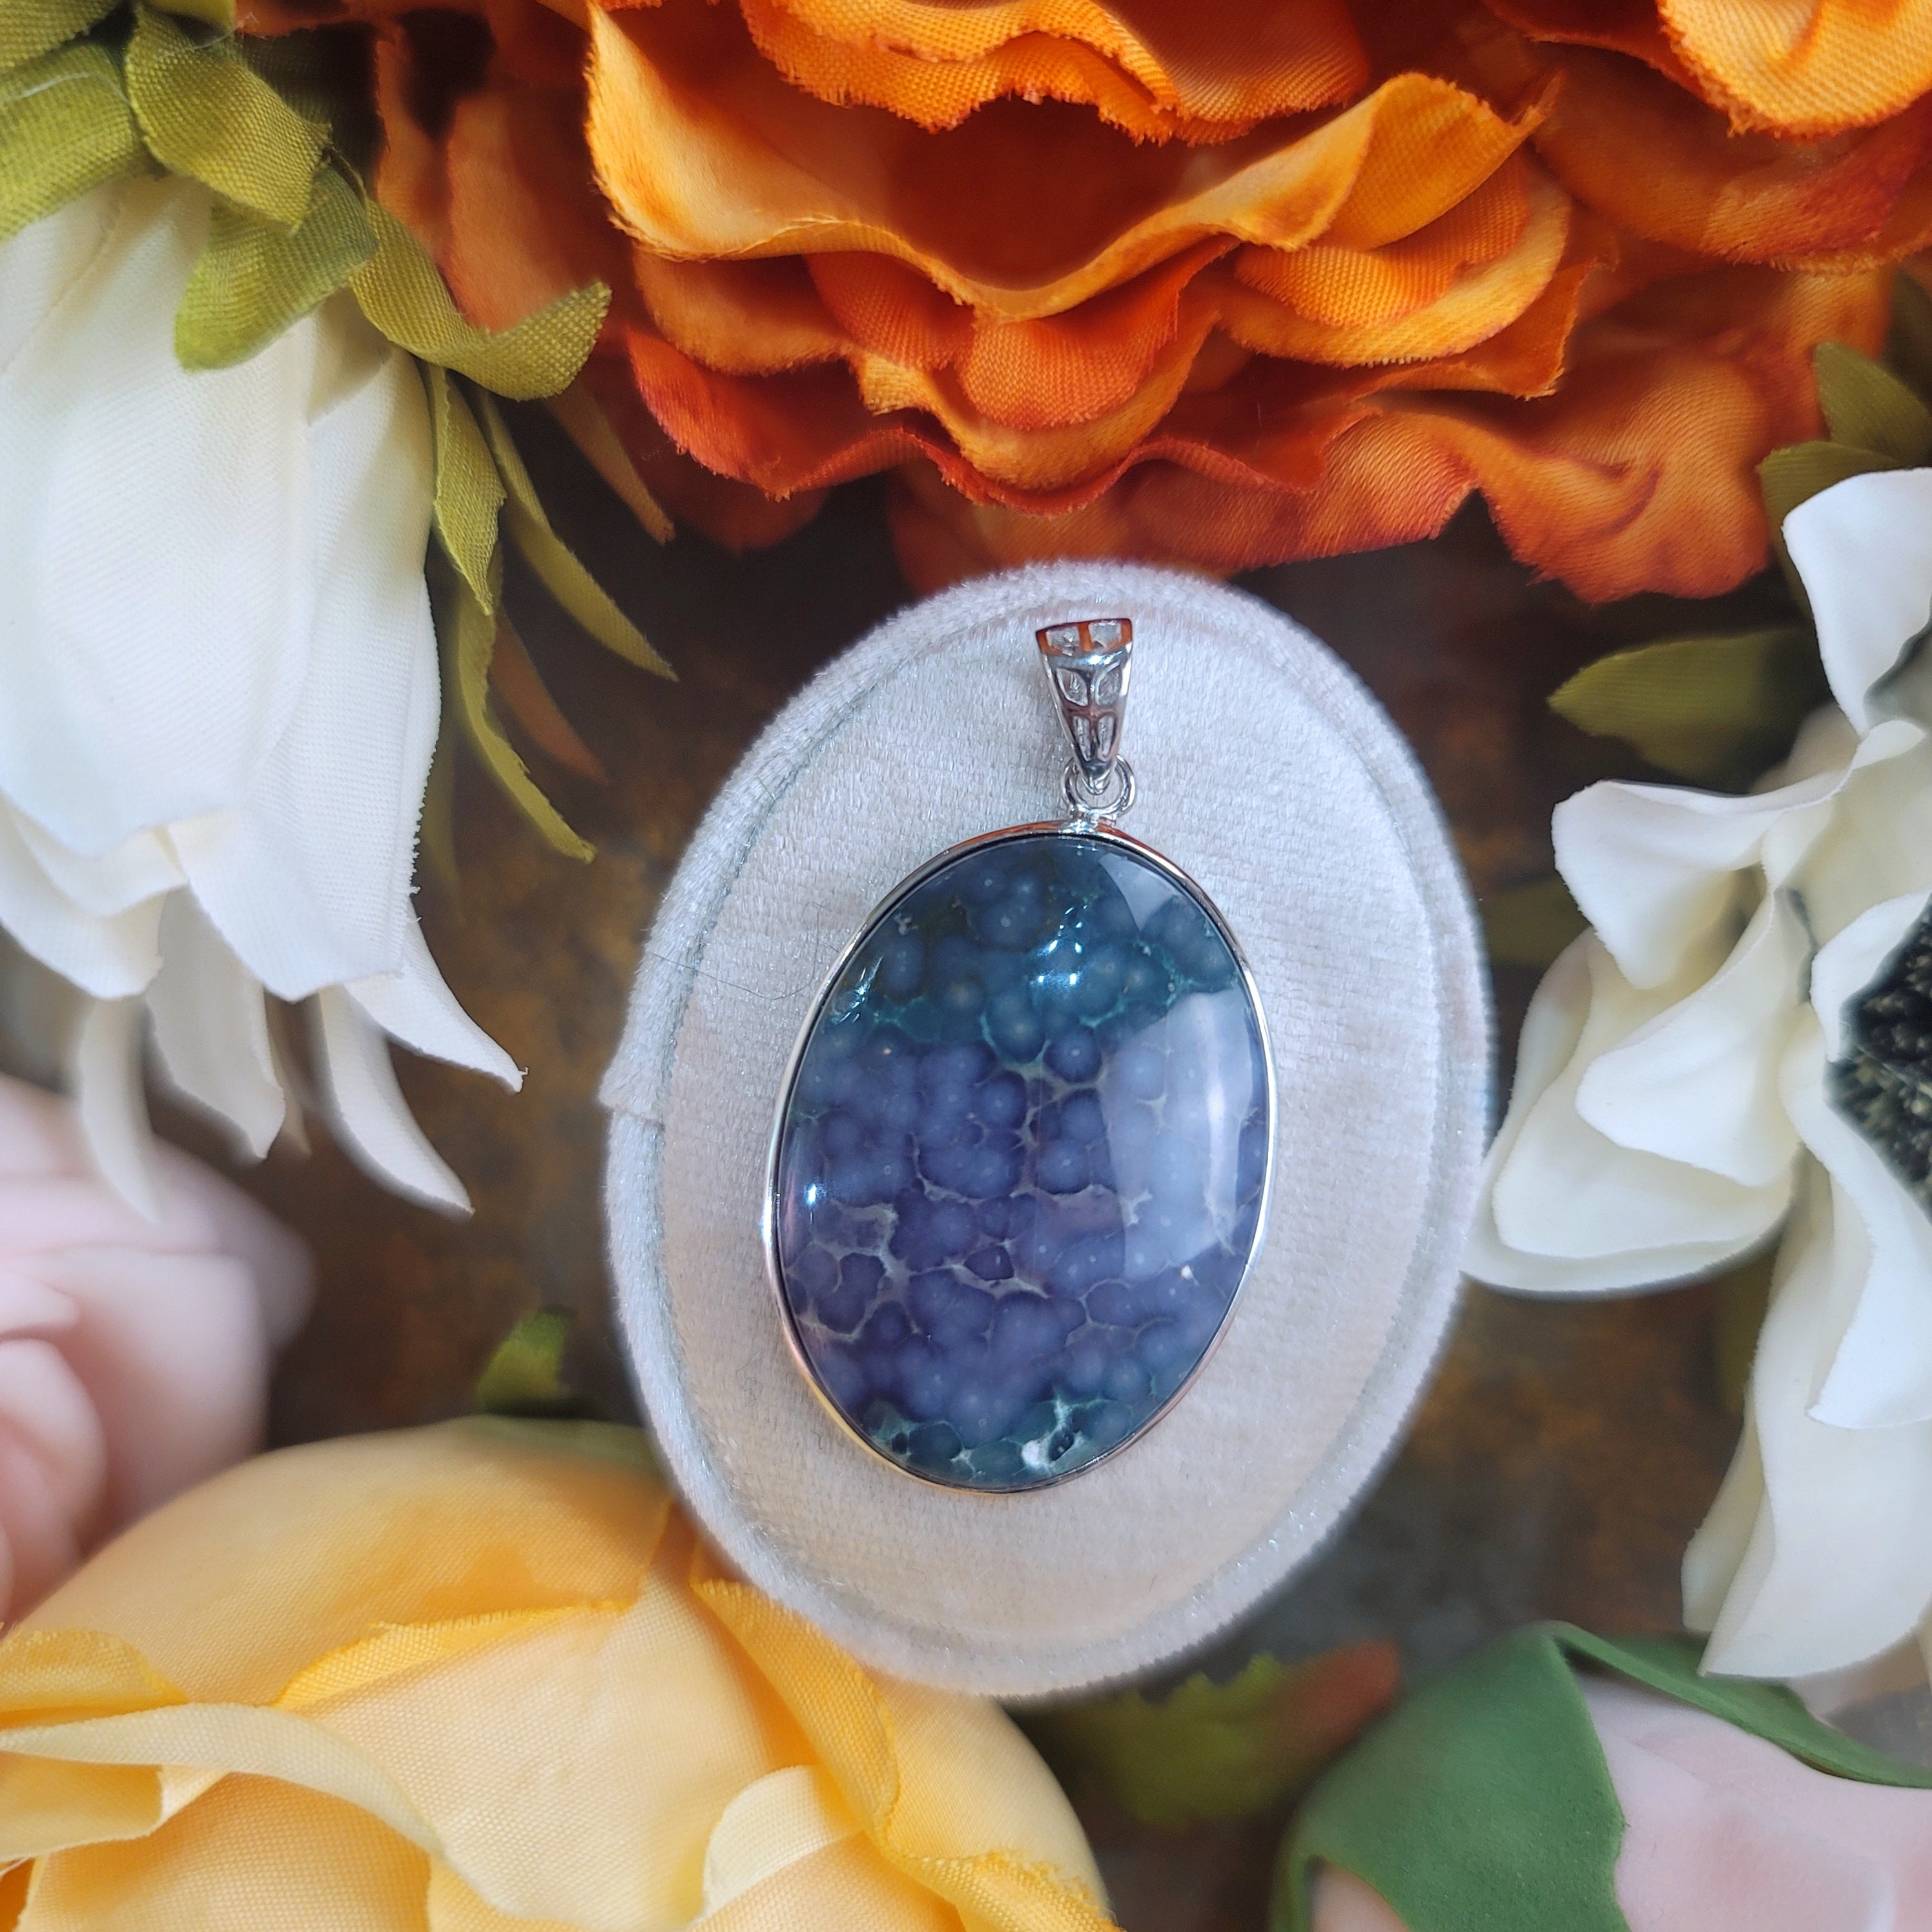 Grape Agate Pendant for Attracting your Soul Mate & Connecting with your Higher Self